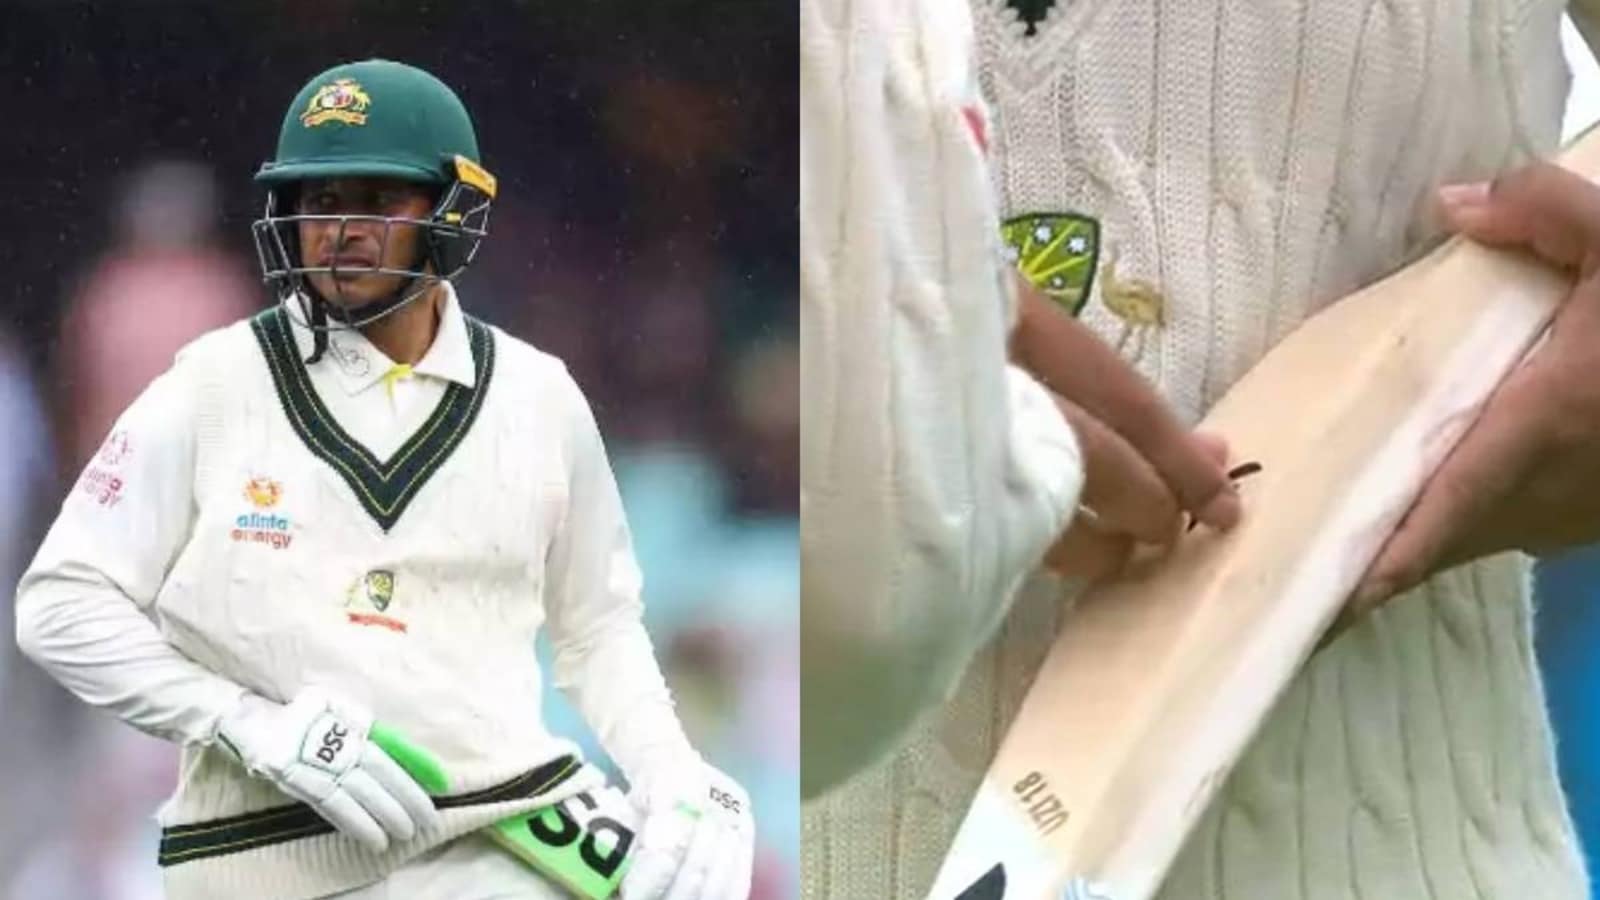 Usman Khawaja forced to act as banned dove logo drama reignites during 1st New Zealand Test months after ICC row